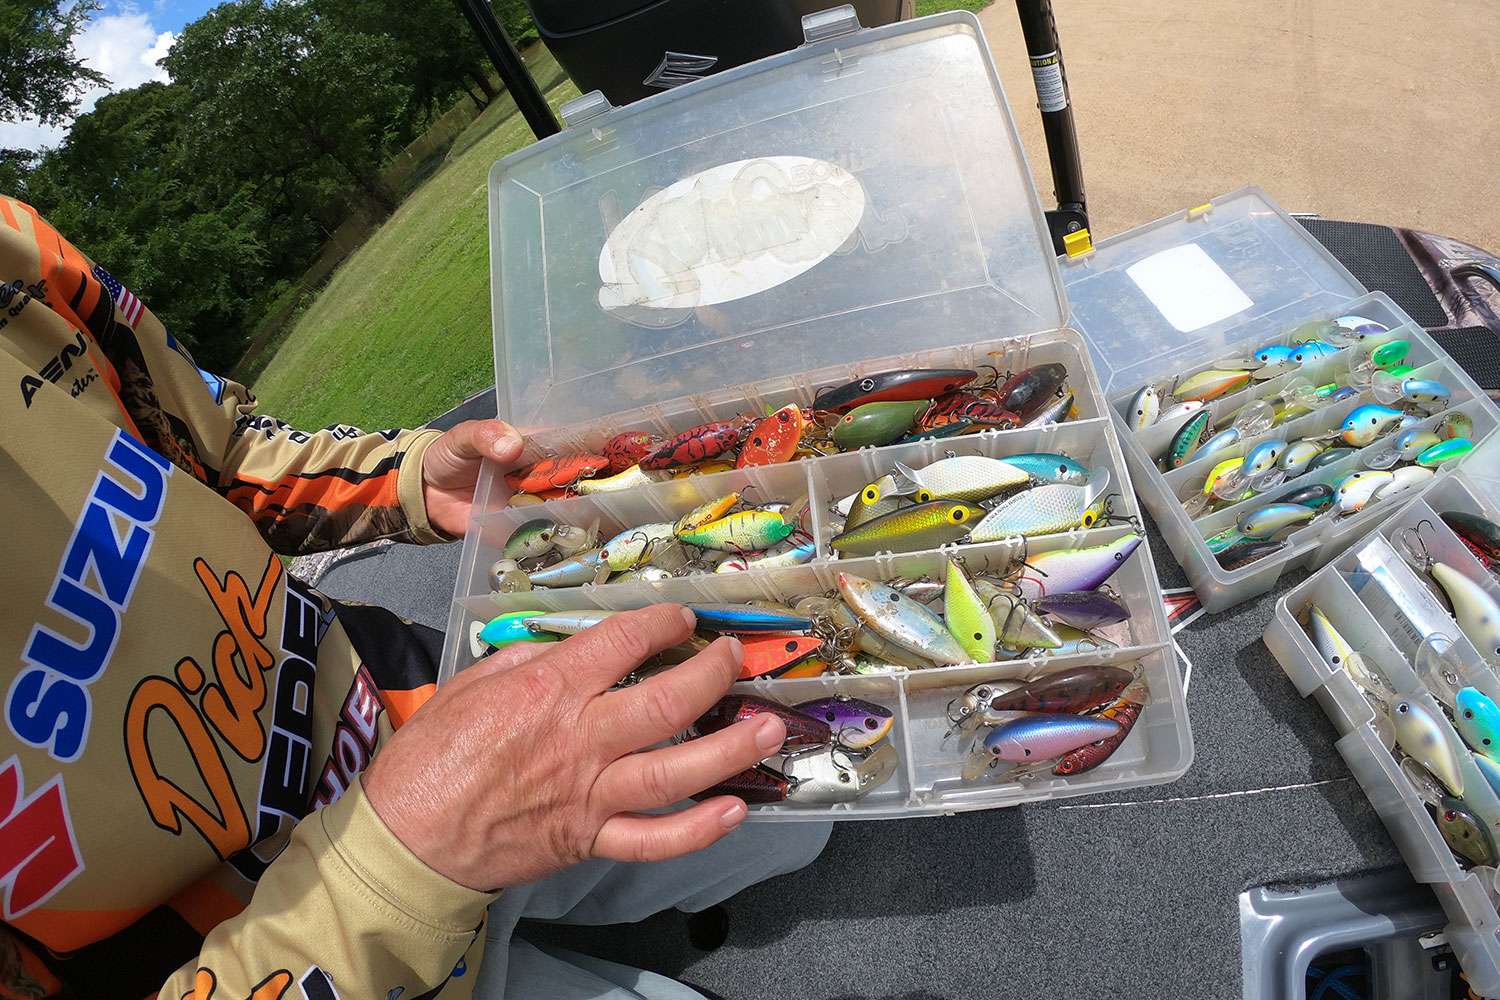 He does have an impressive collection of new and old baits. 